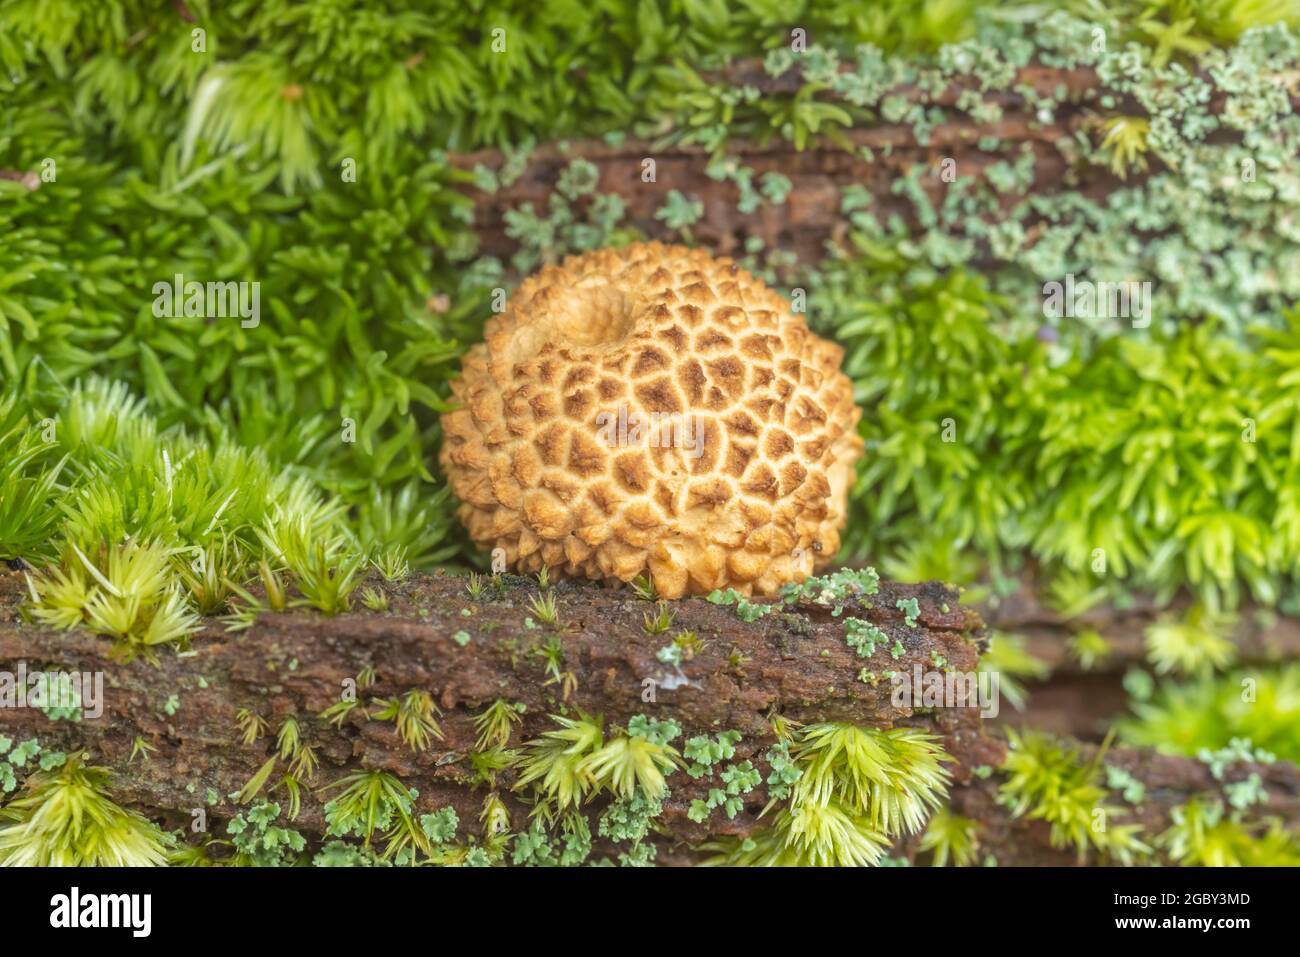 Earthball Commun (Scleroderma Citrinum) Banque D'Images